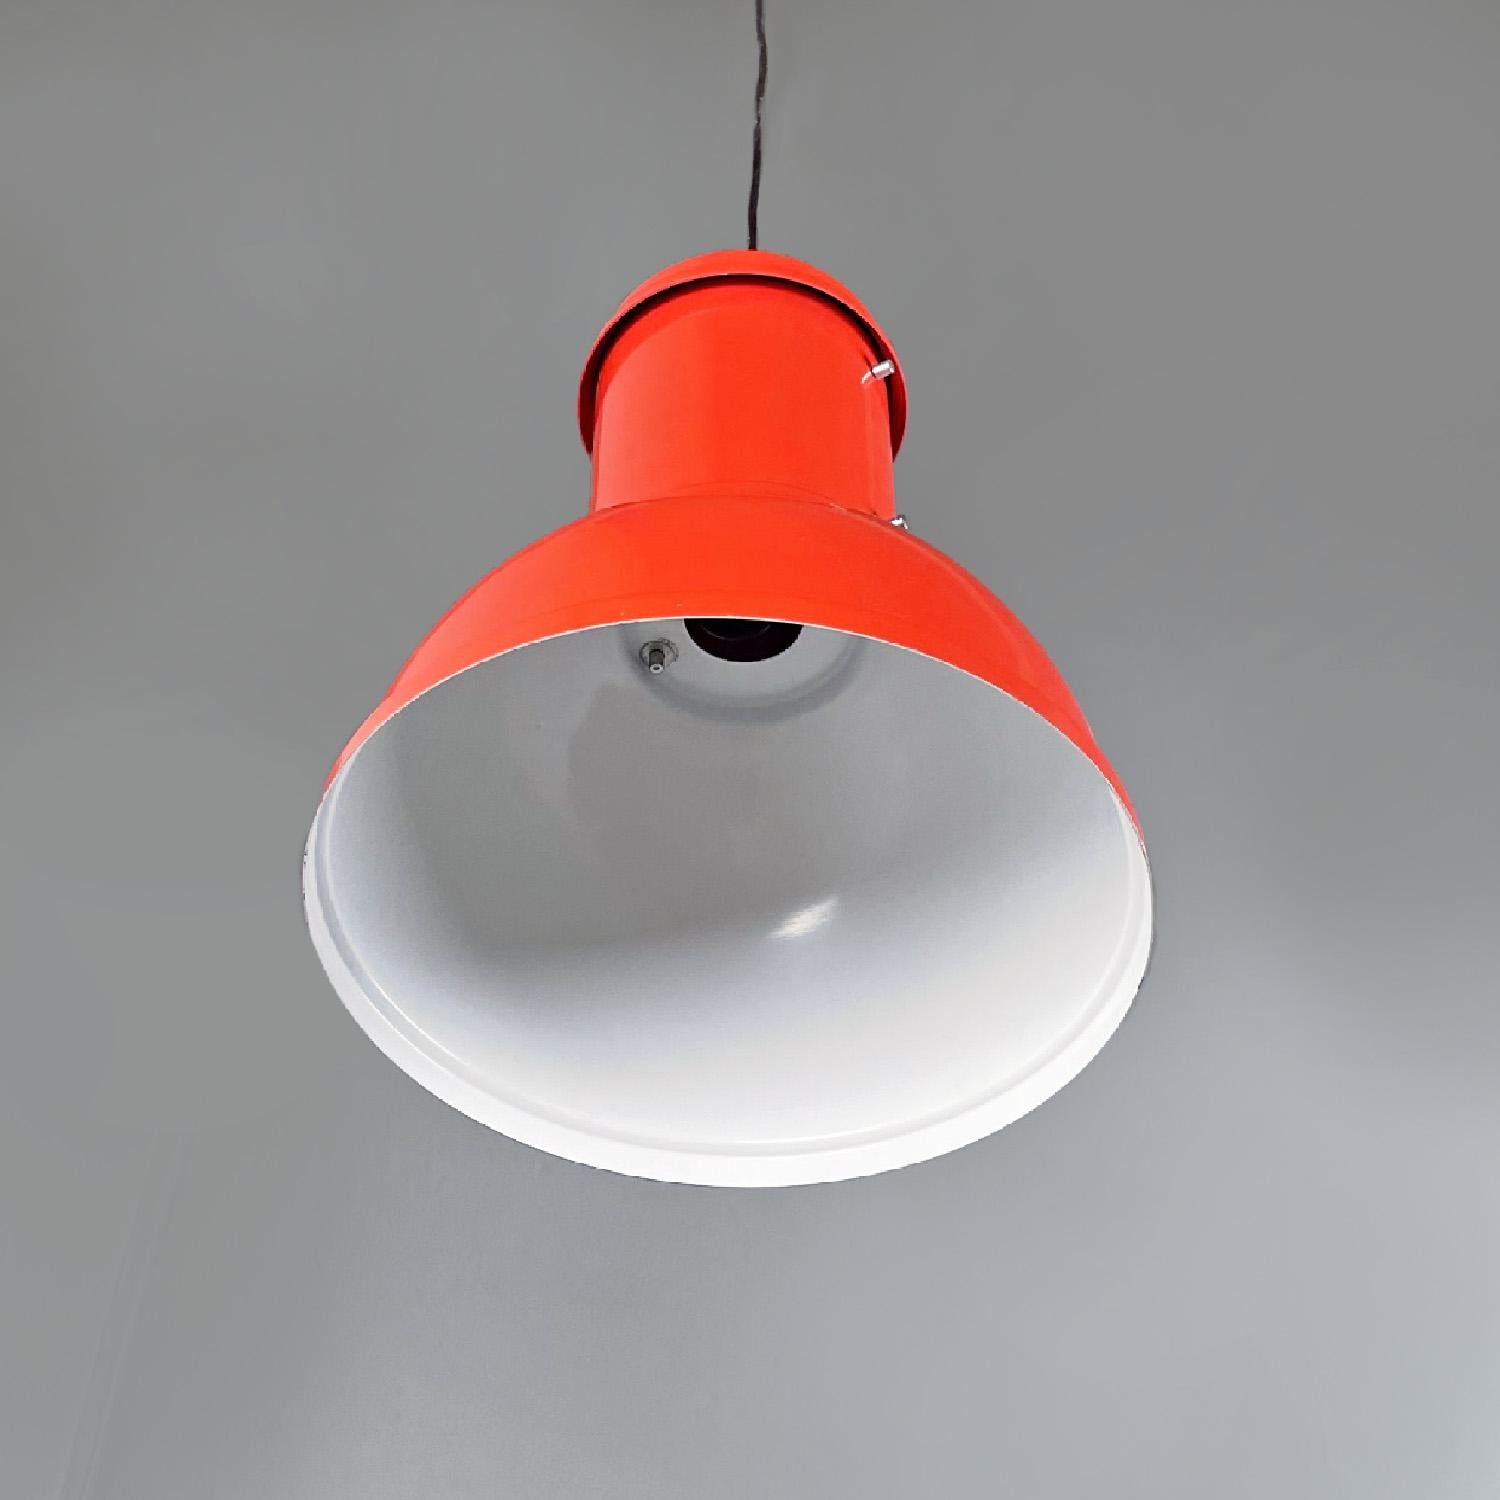 Mid-20th Century Italian red chandelier Lampara by Roberto Menghi for Fontana Arte, 1960s For Sale